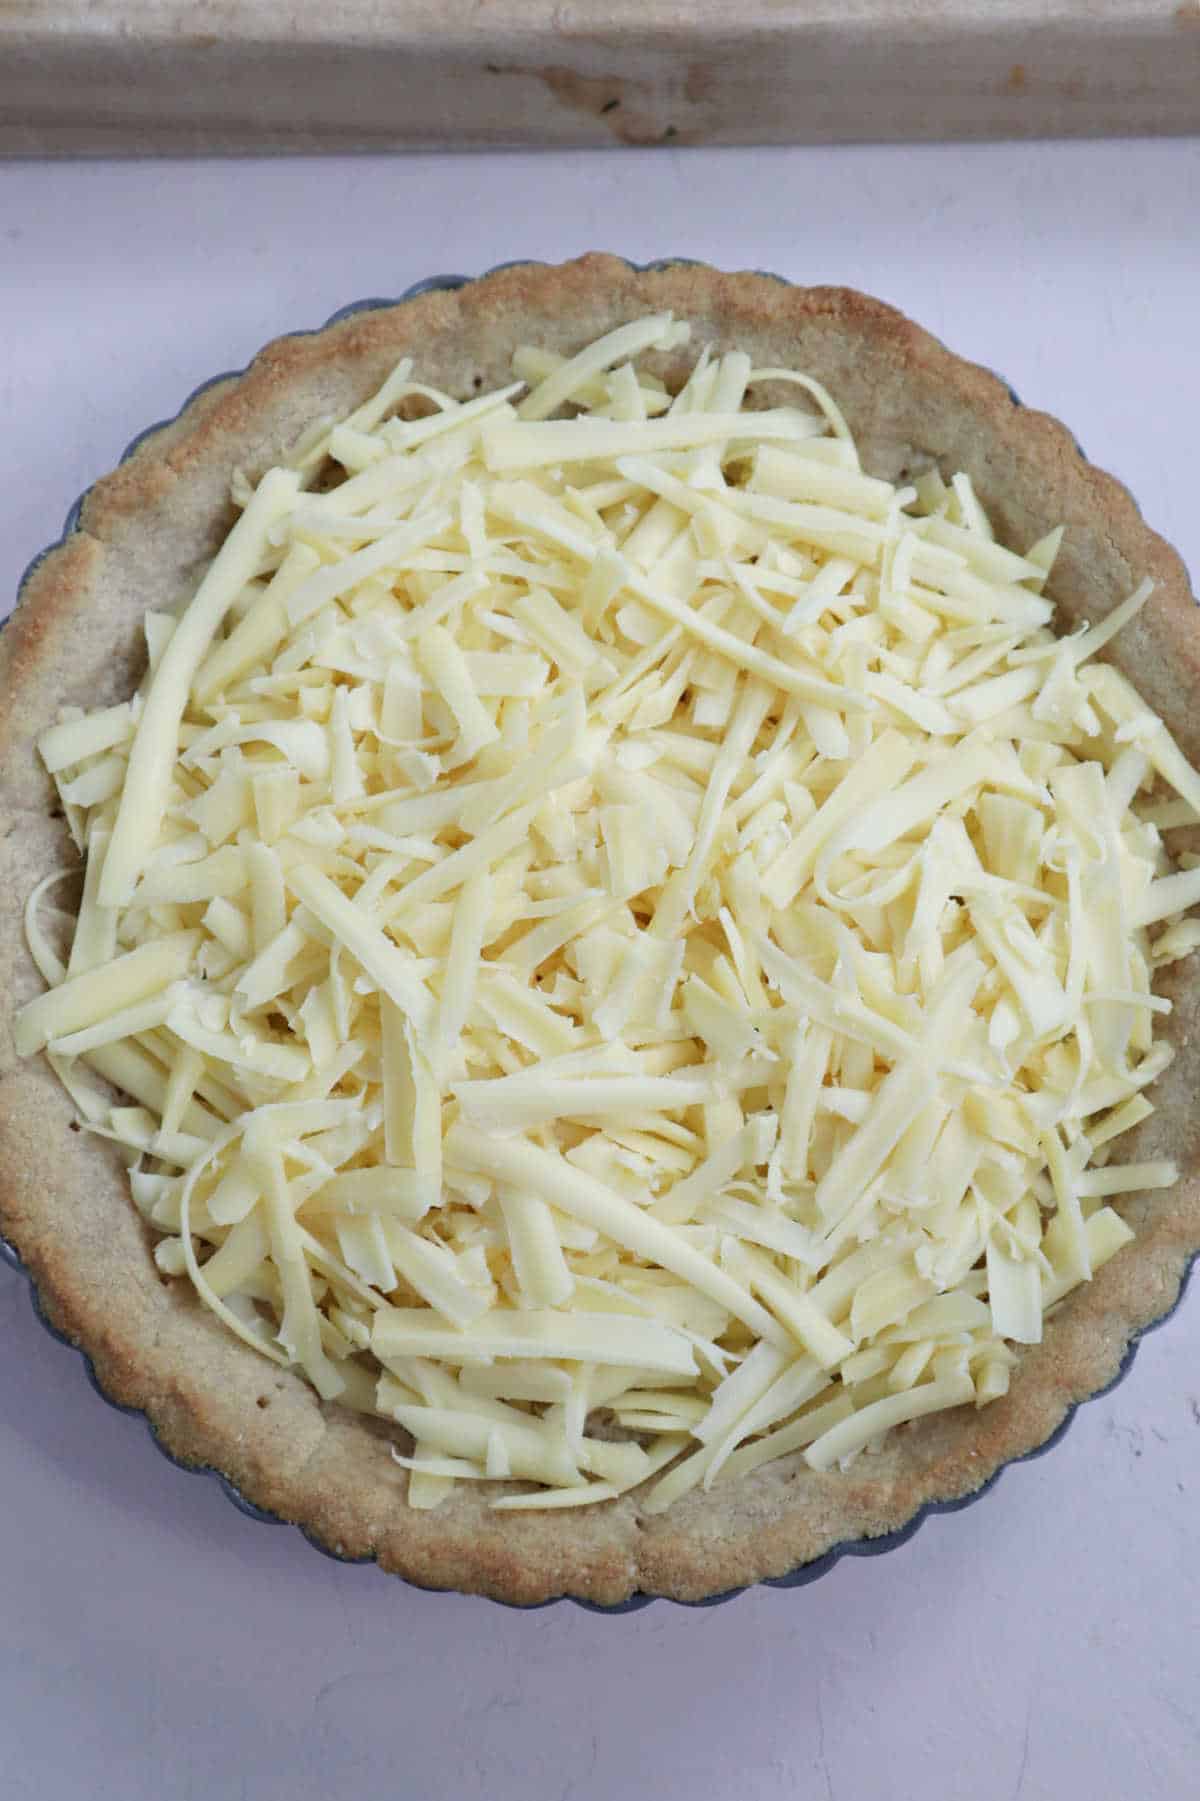 Shredded cheese in a baked crust.